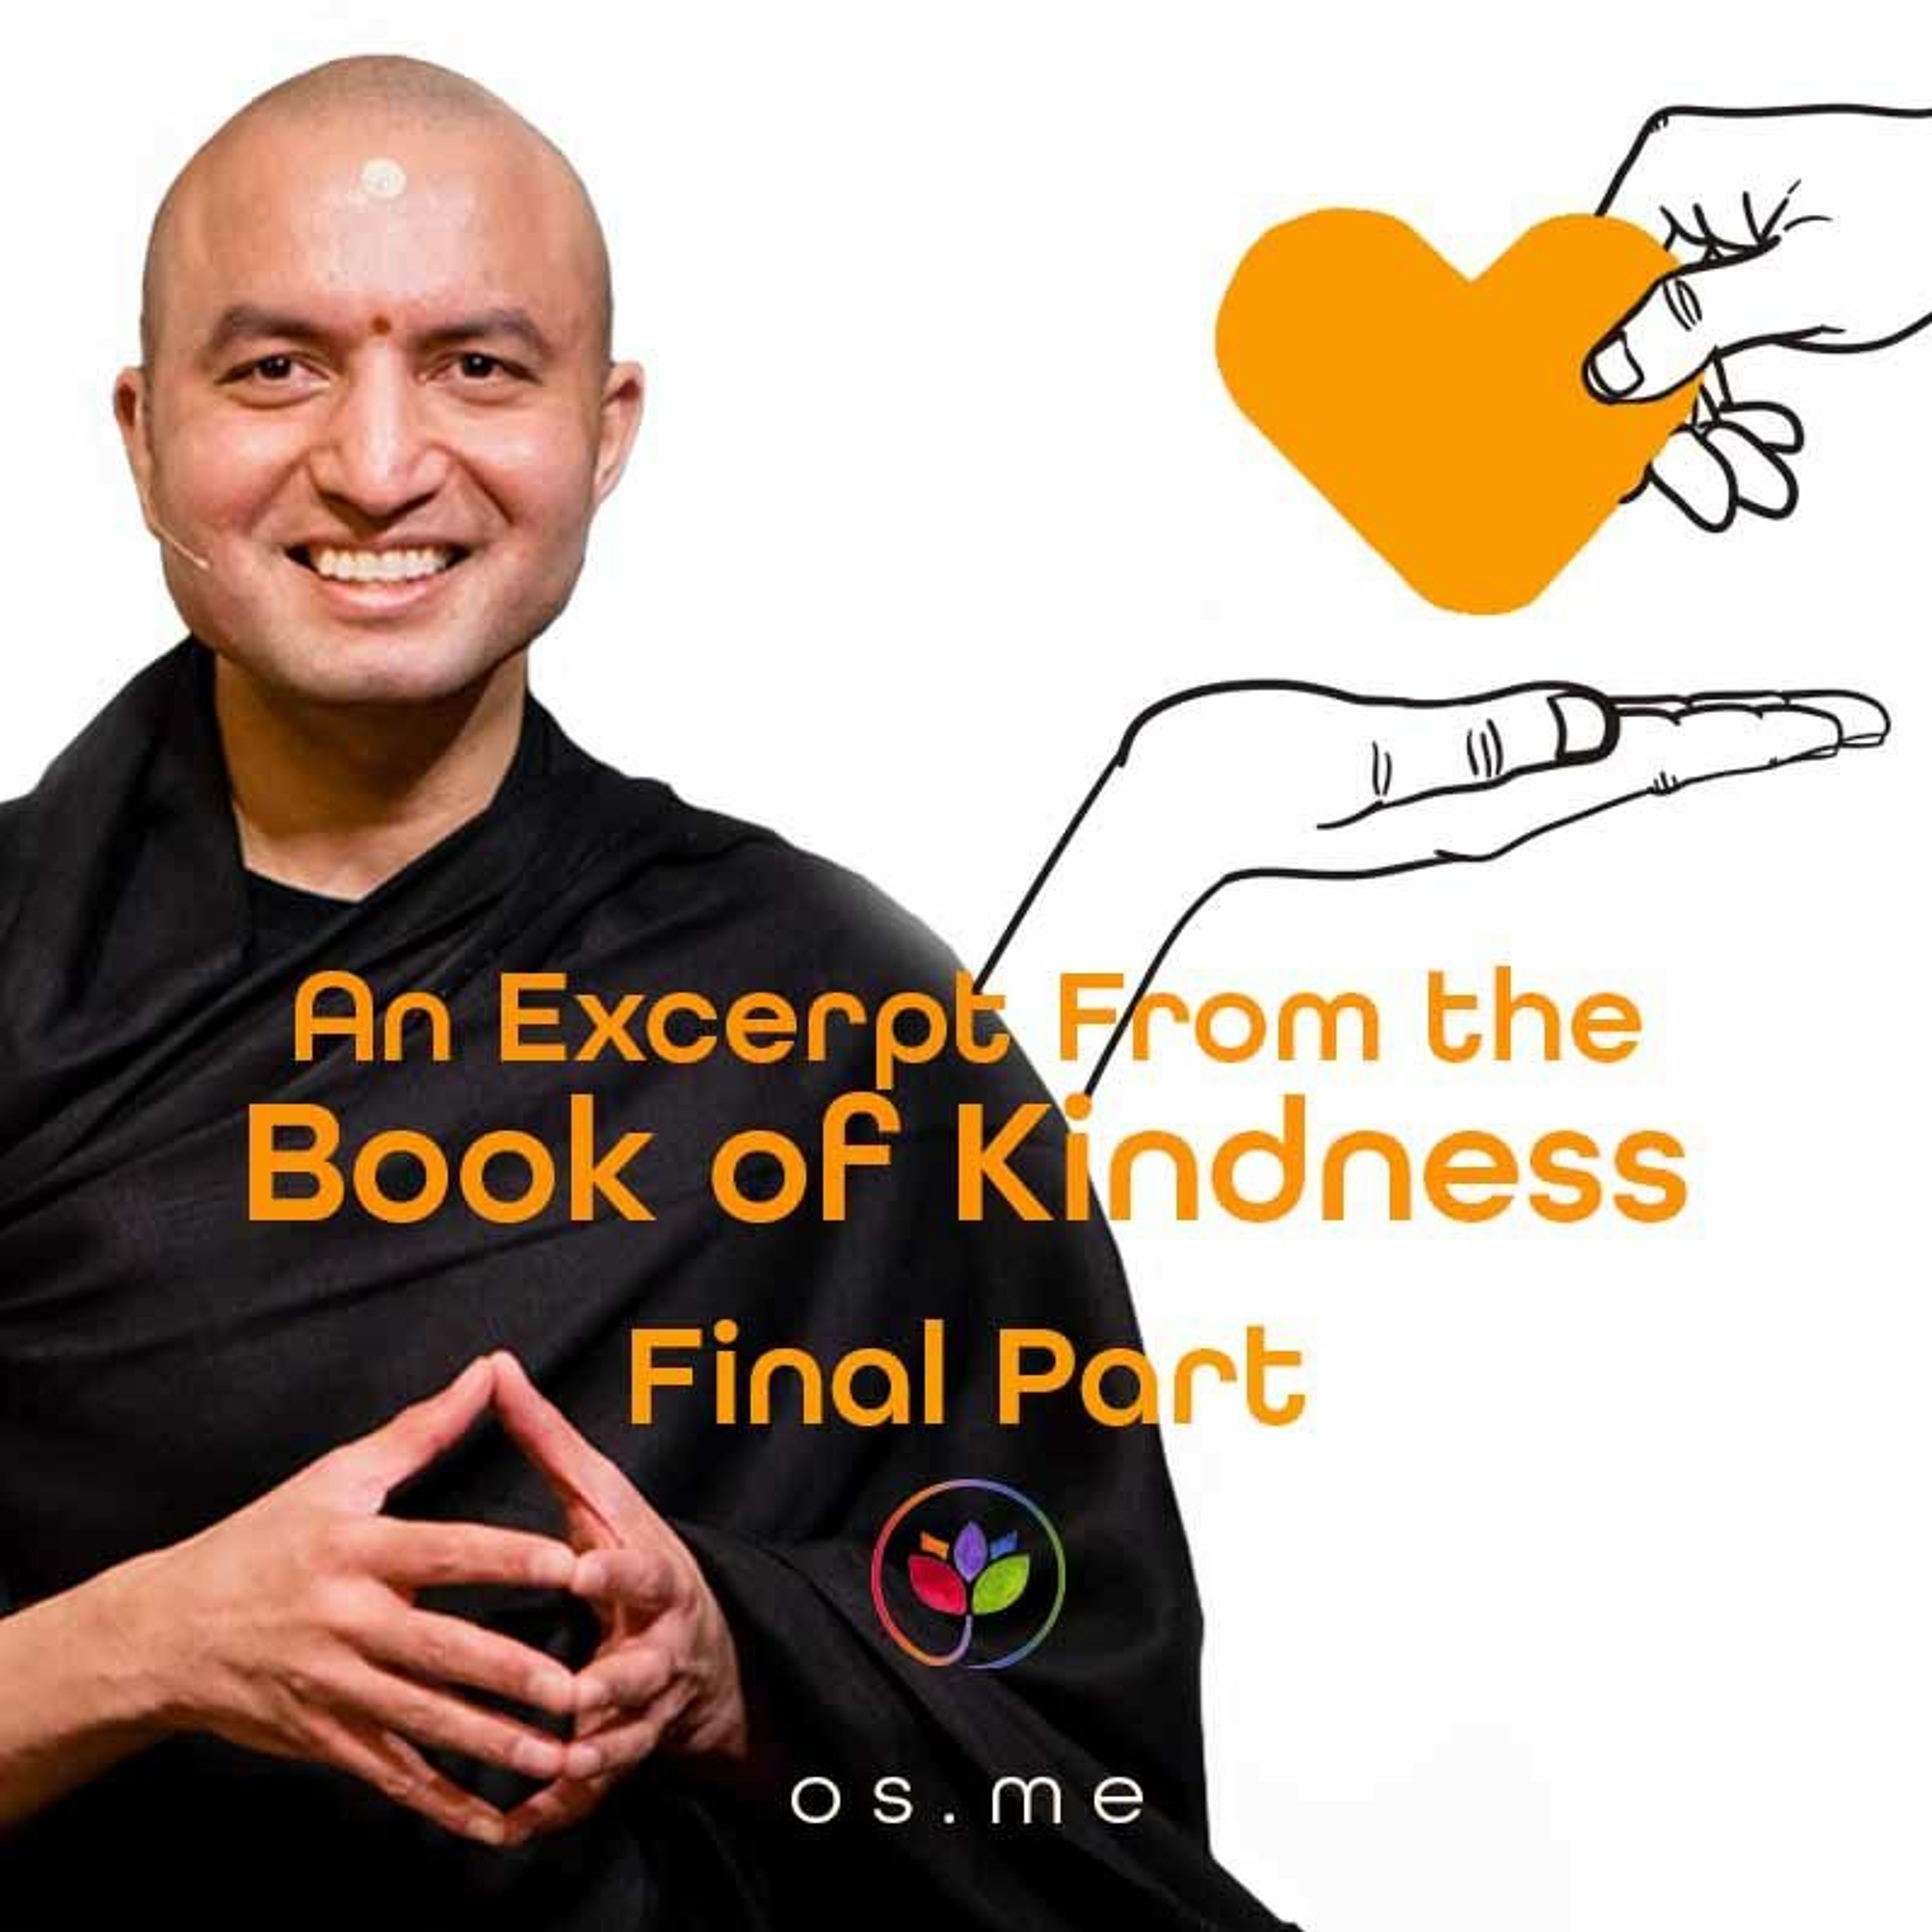 An Excerpt From the Book of Kindness Part 4